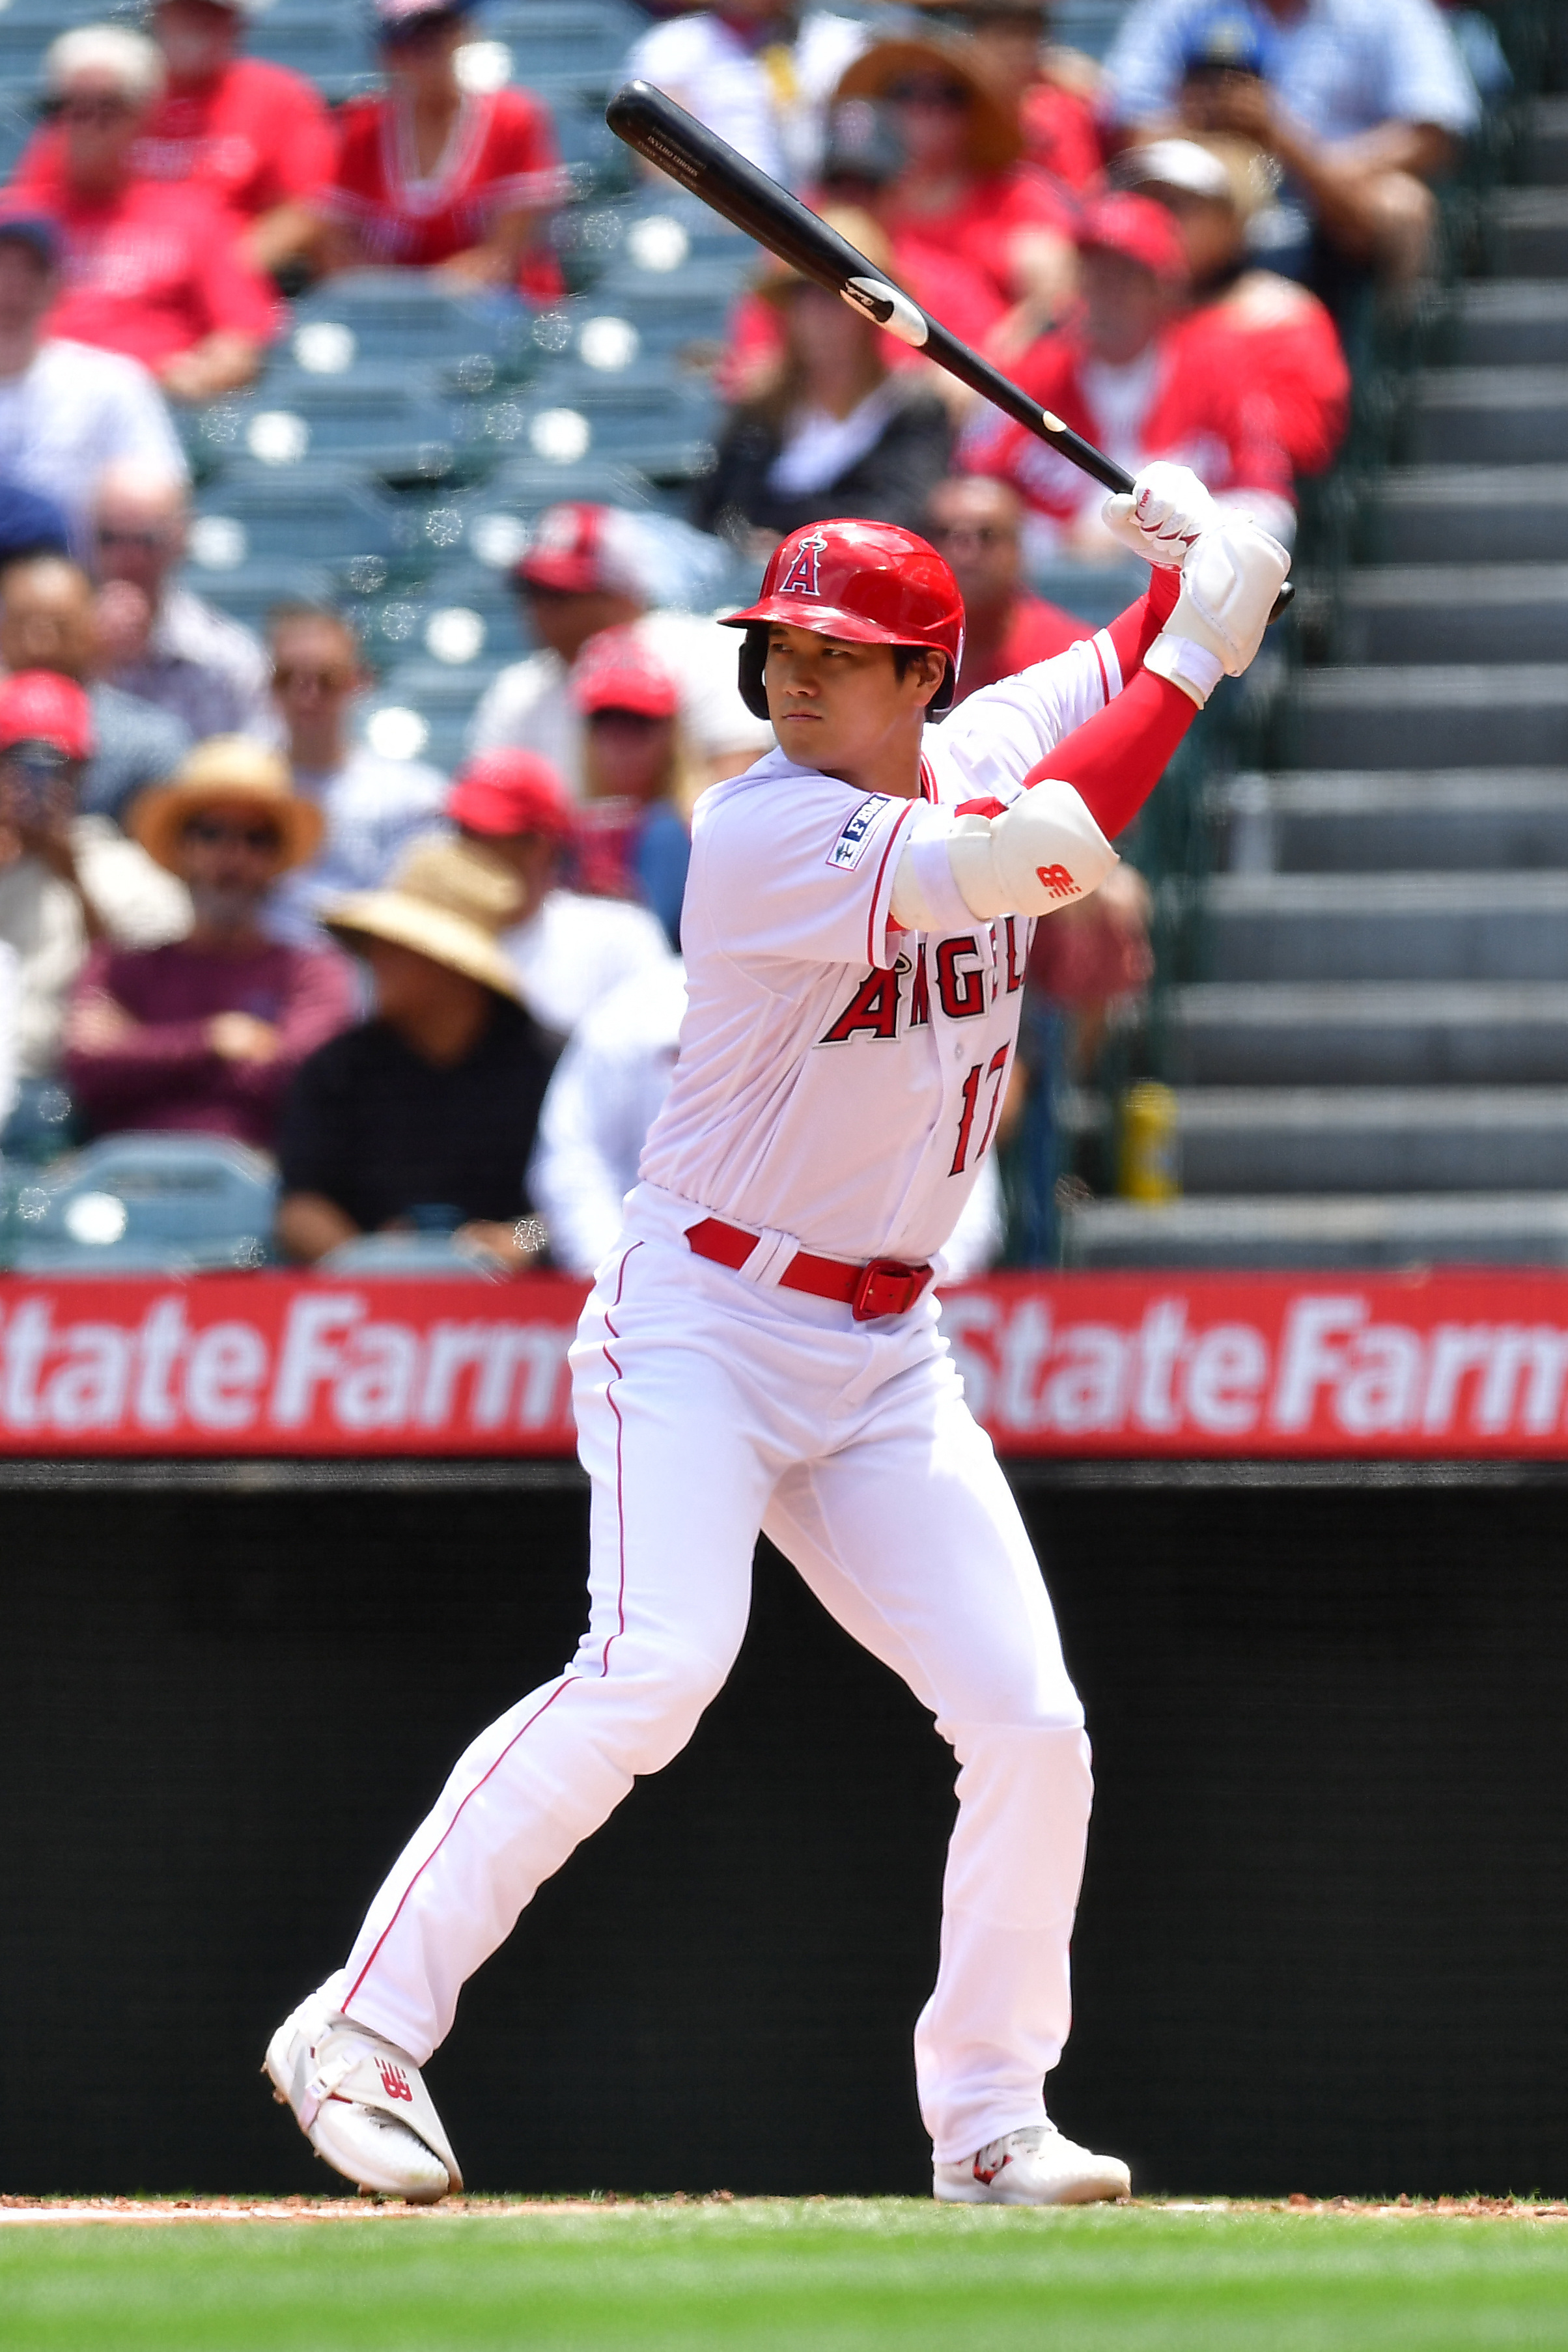 Houston Astros: Cristian Javier puts an oh-fer on Trout, Ohtani